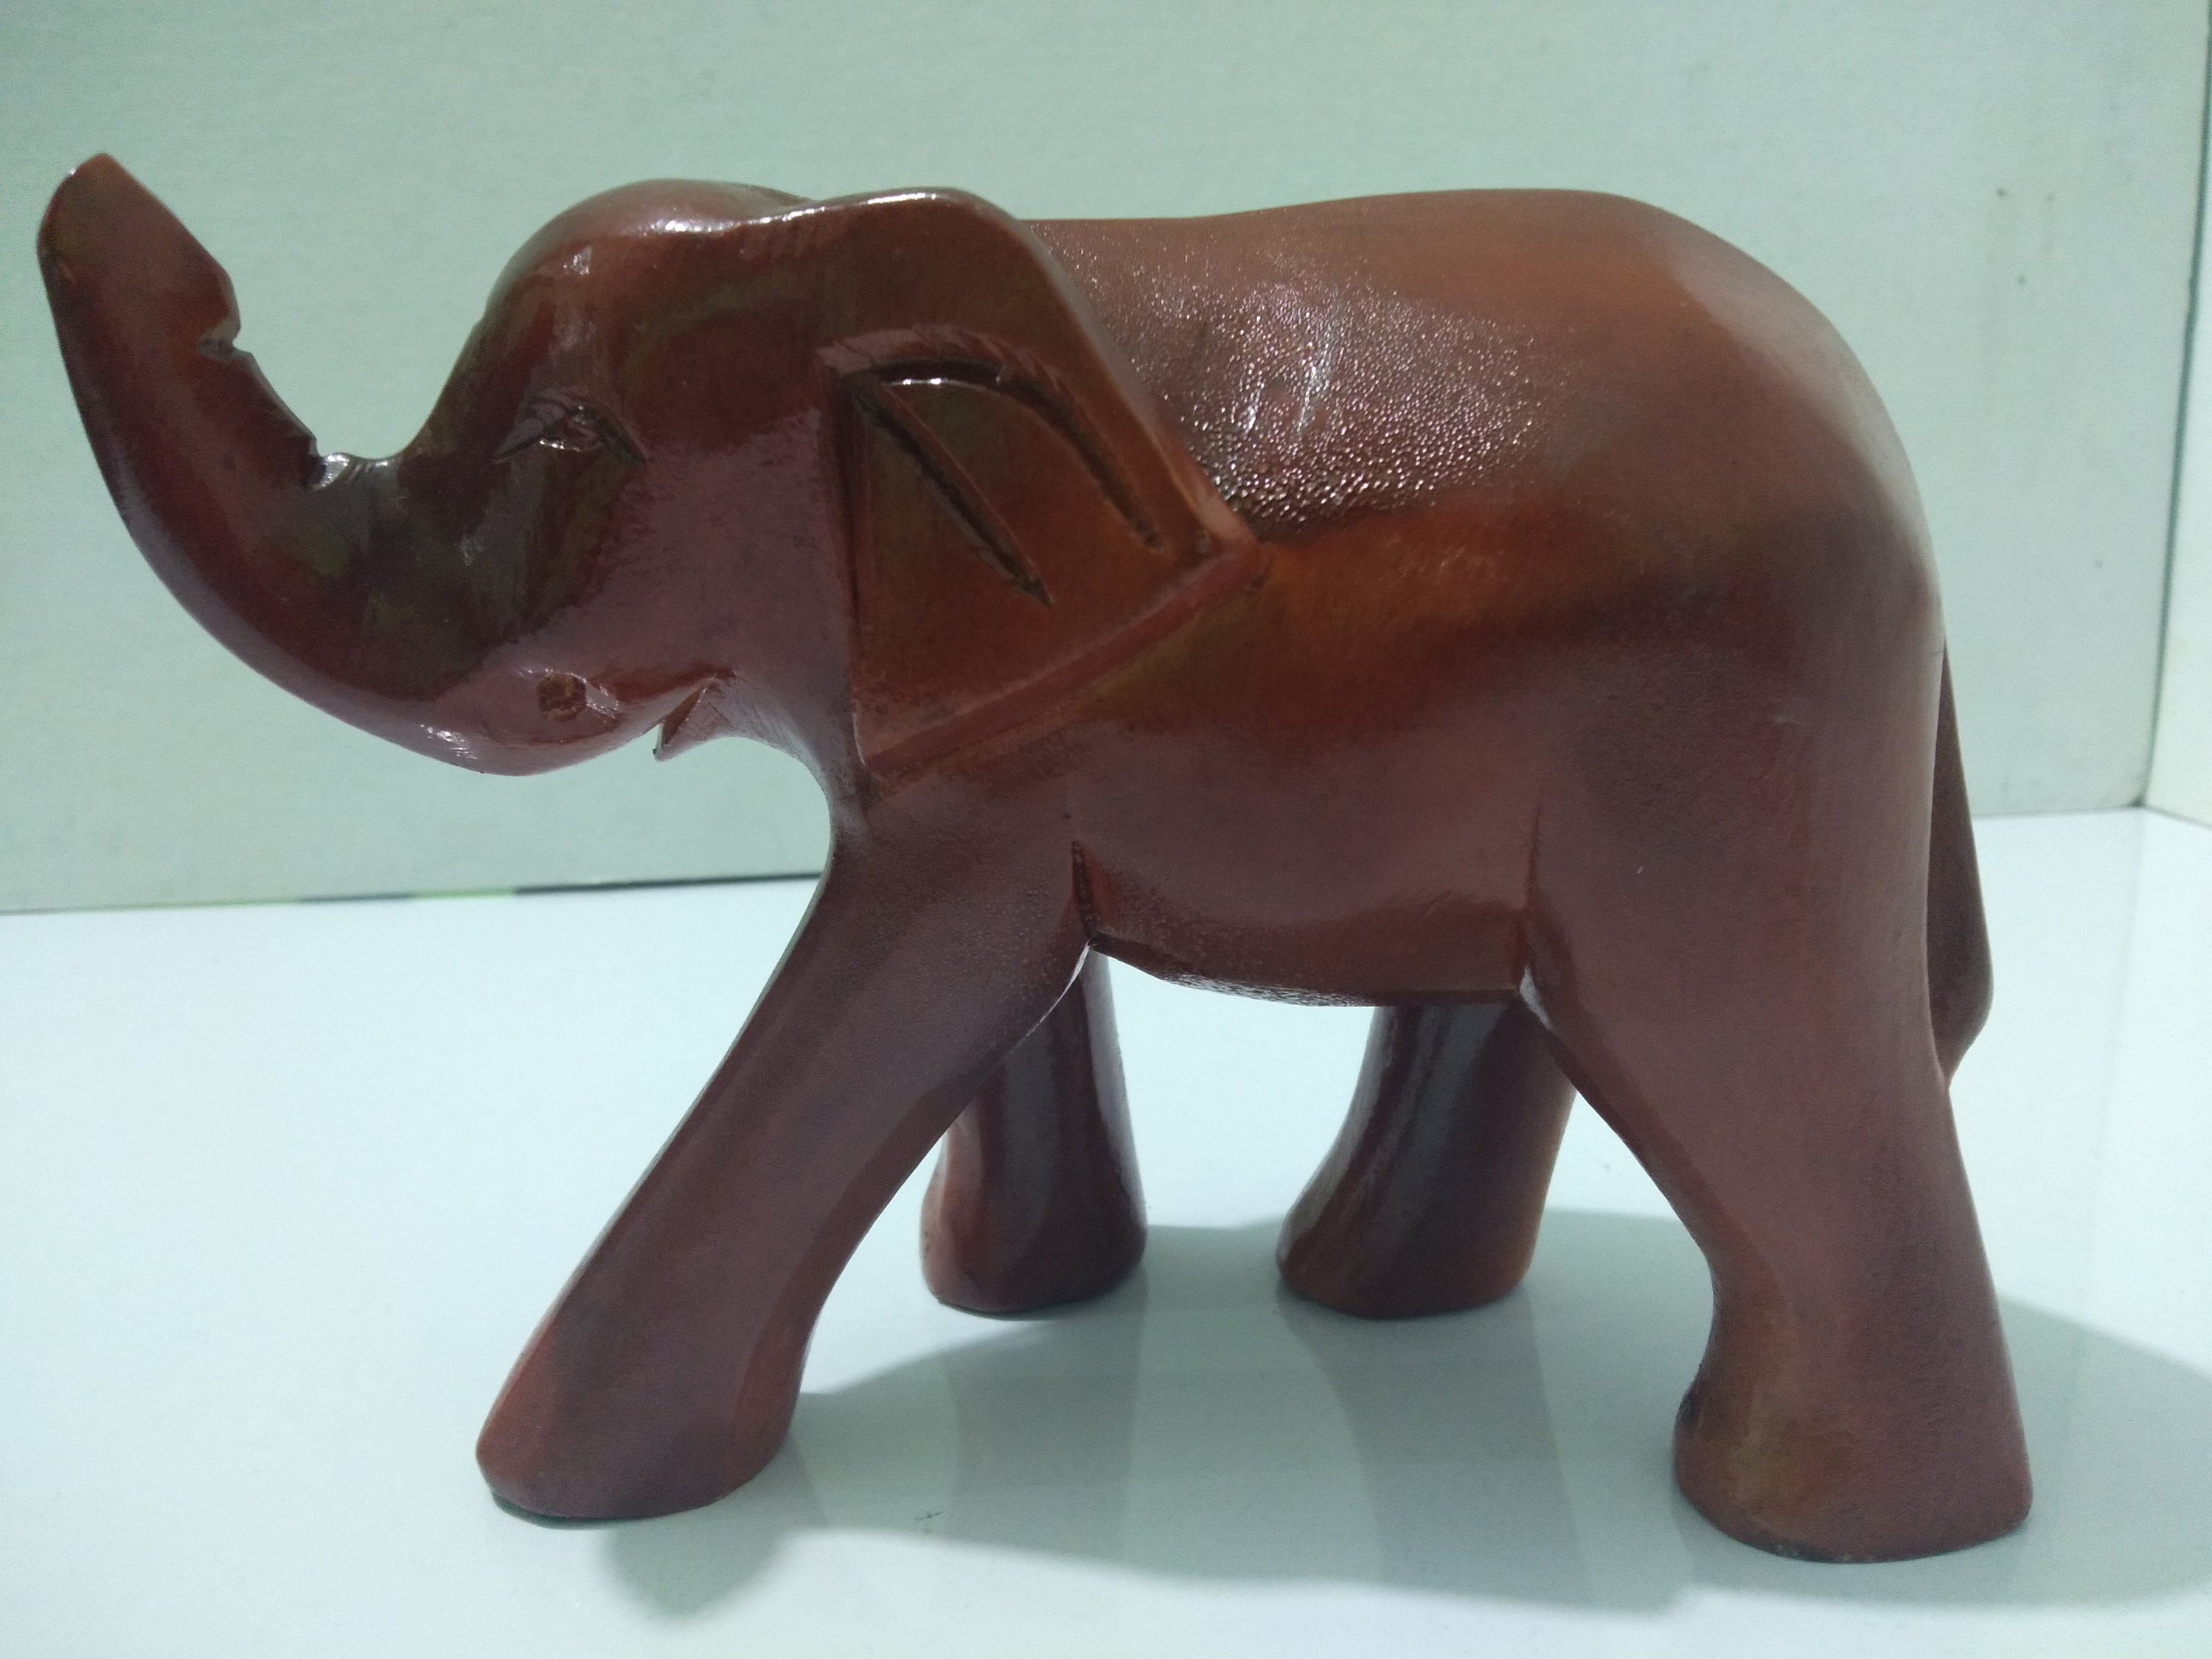 Elephant Figurines Vintage Wood Carved Handmade Natural Animal Lovers Collection 